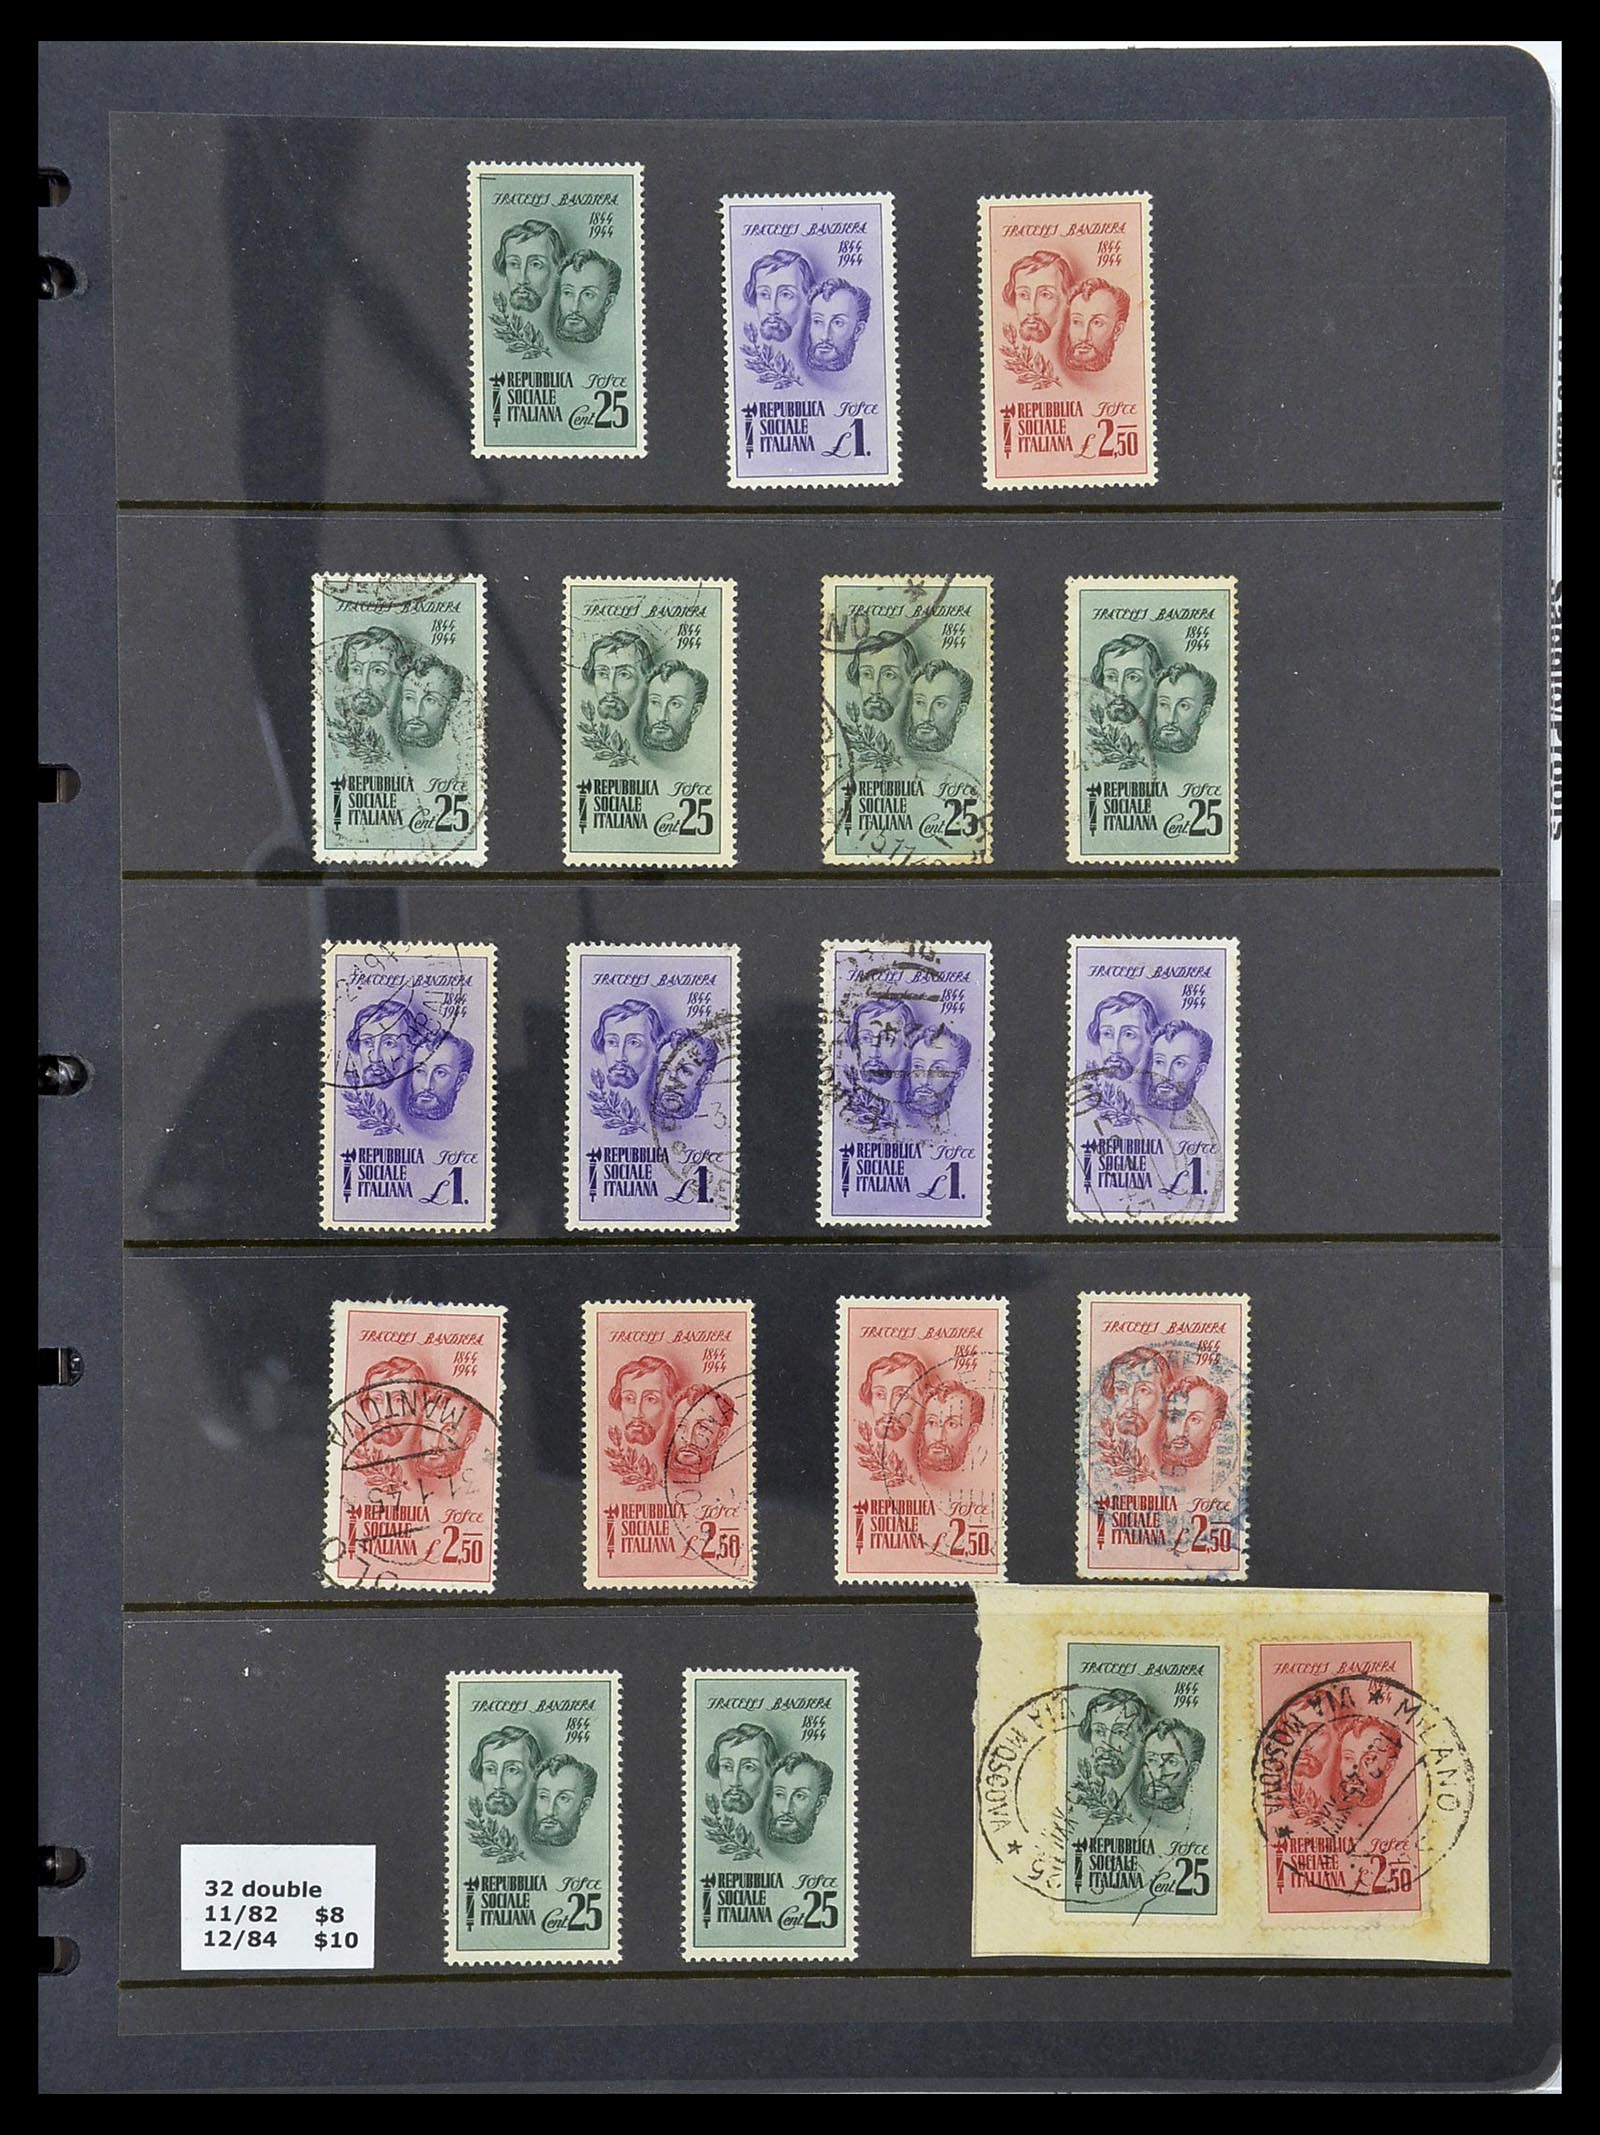 34227 030 - Stamp collection 34227 Italy R.S.I. 1943-1945.